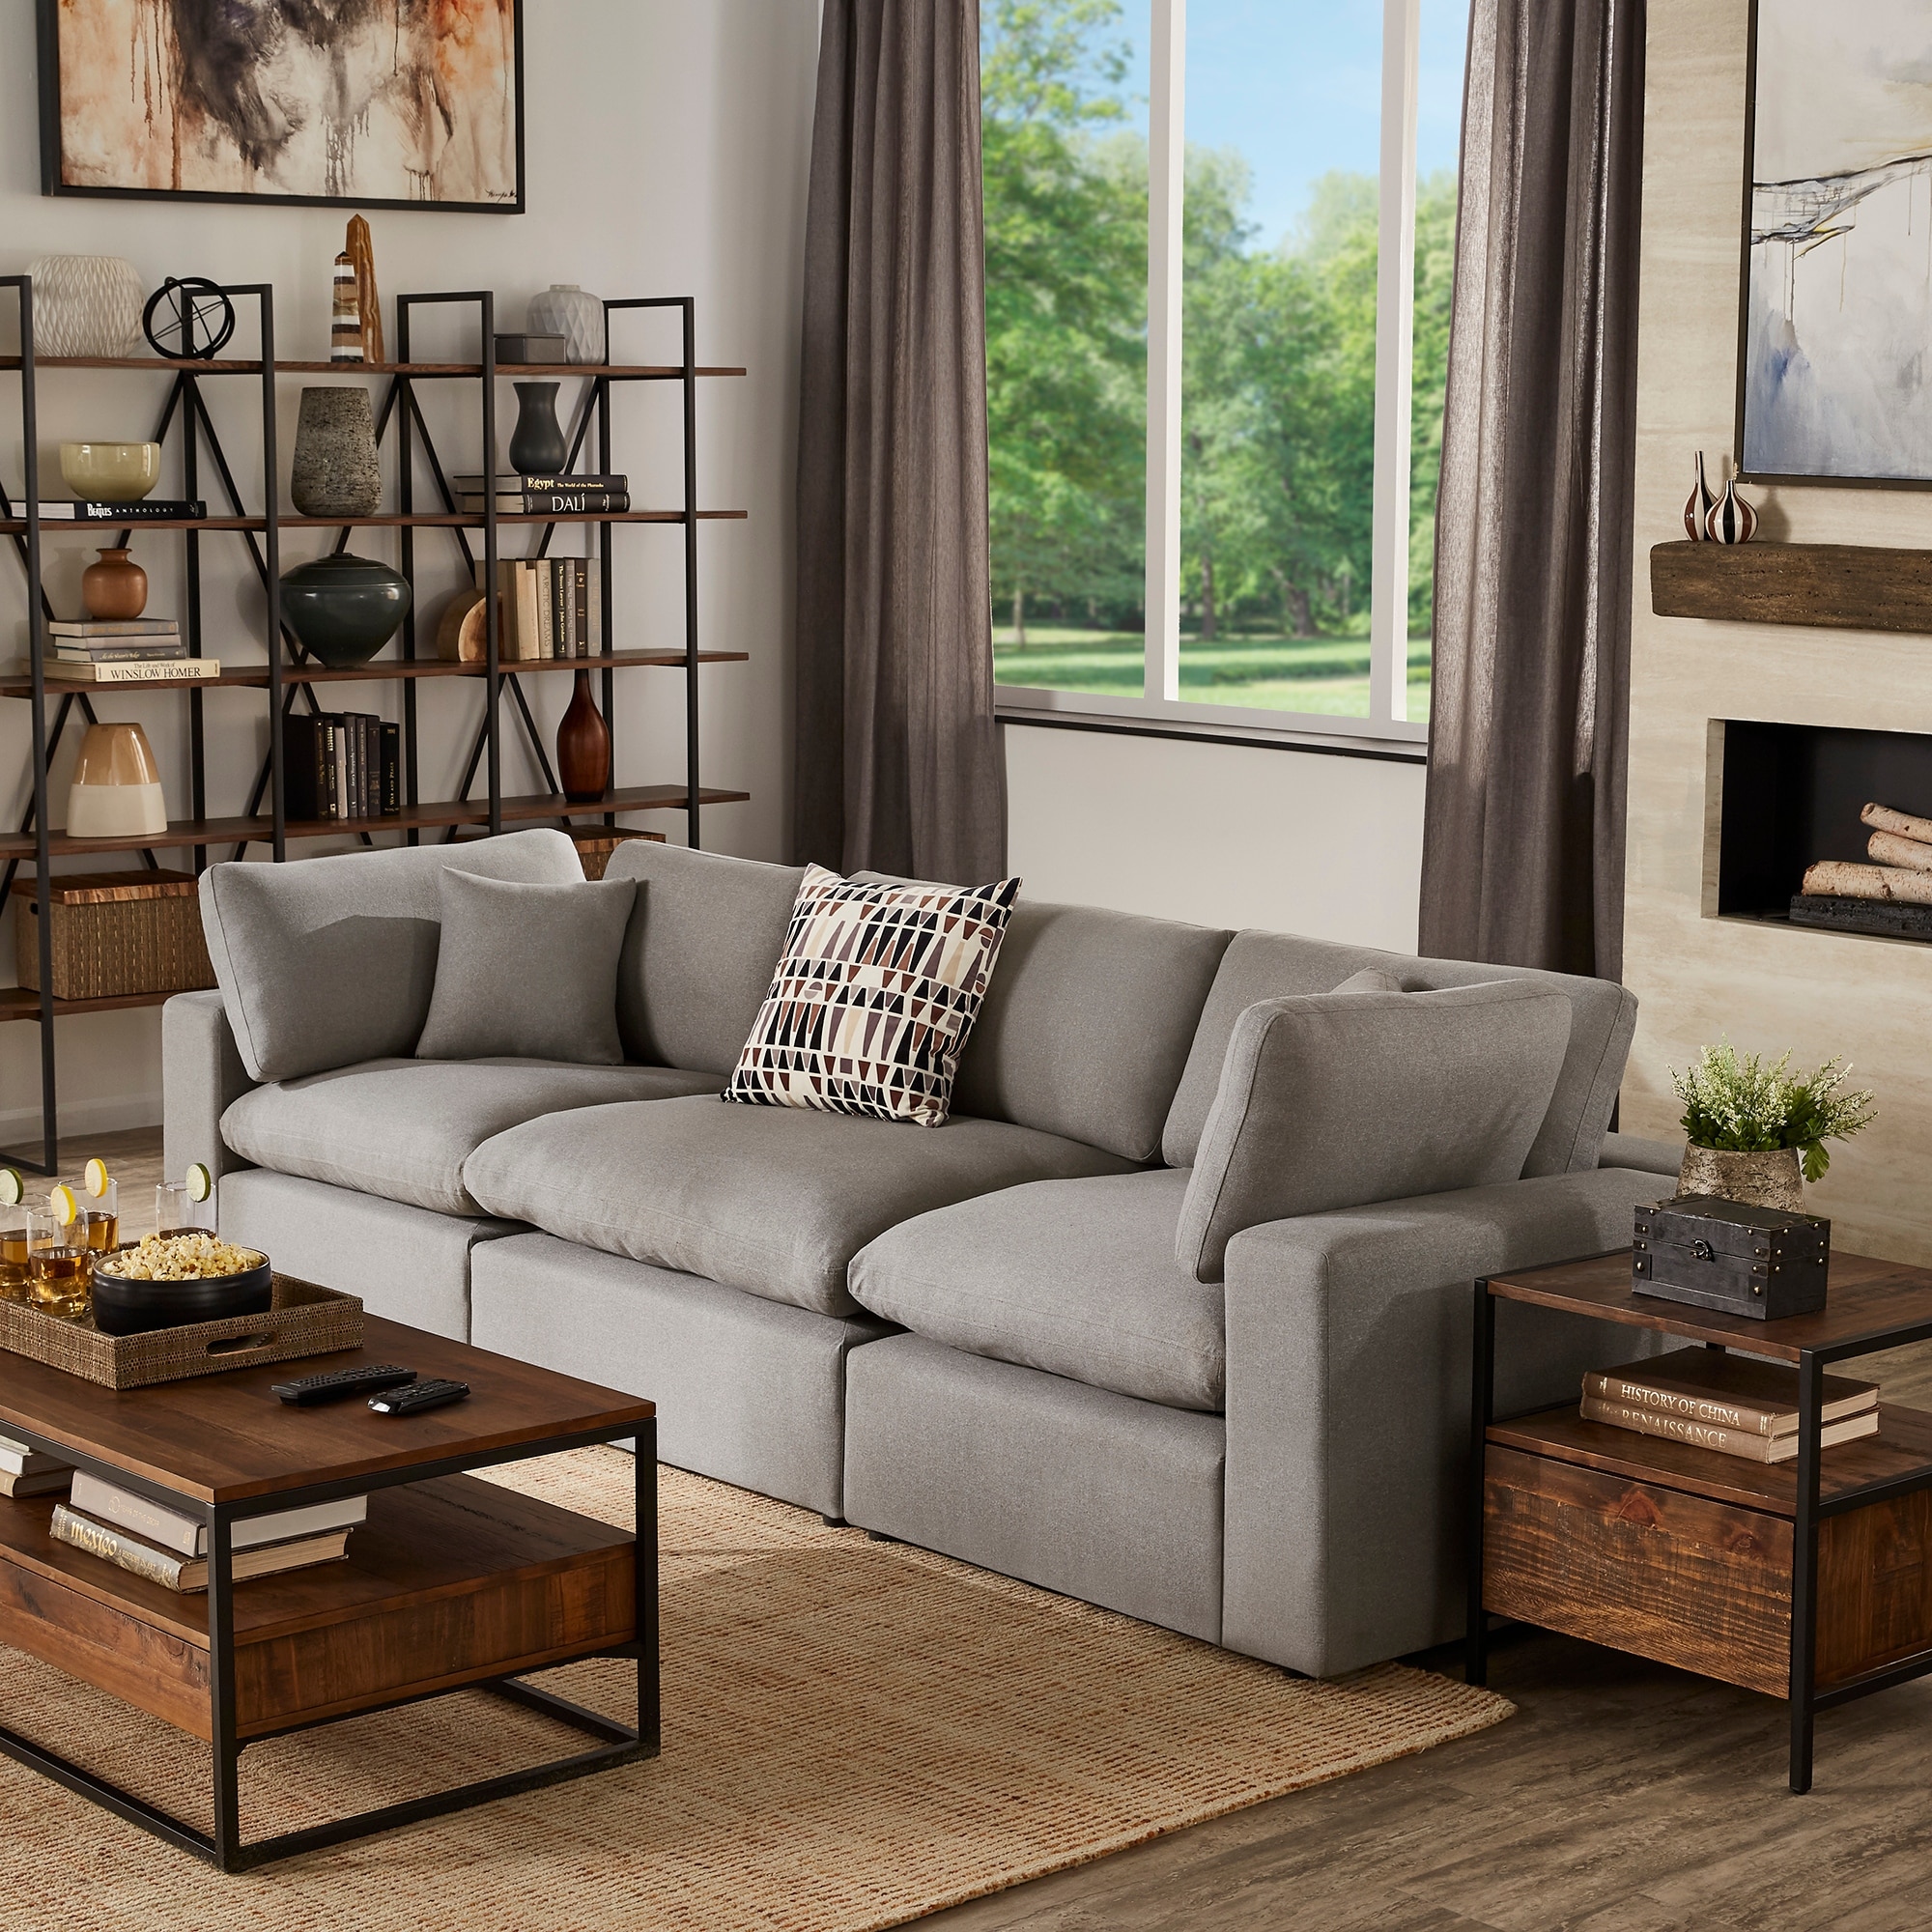 https://ak1.ostkcdn.com/images/products/is/images/direct/7a8dc681c3a6d21d88bcbaa308ce2eb36259befd/Anka-Grey-Linen-Weave-Fabric-Sofa-by-iNSPIRE-Q-Modern.jpg